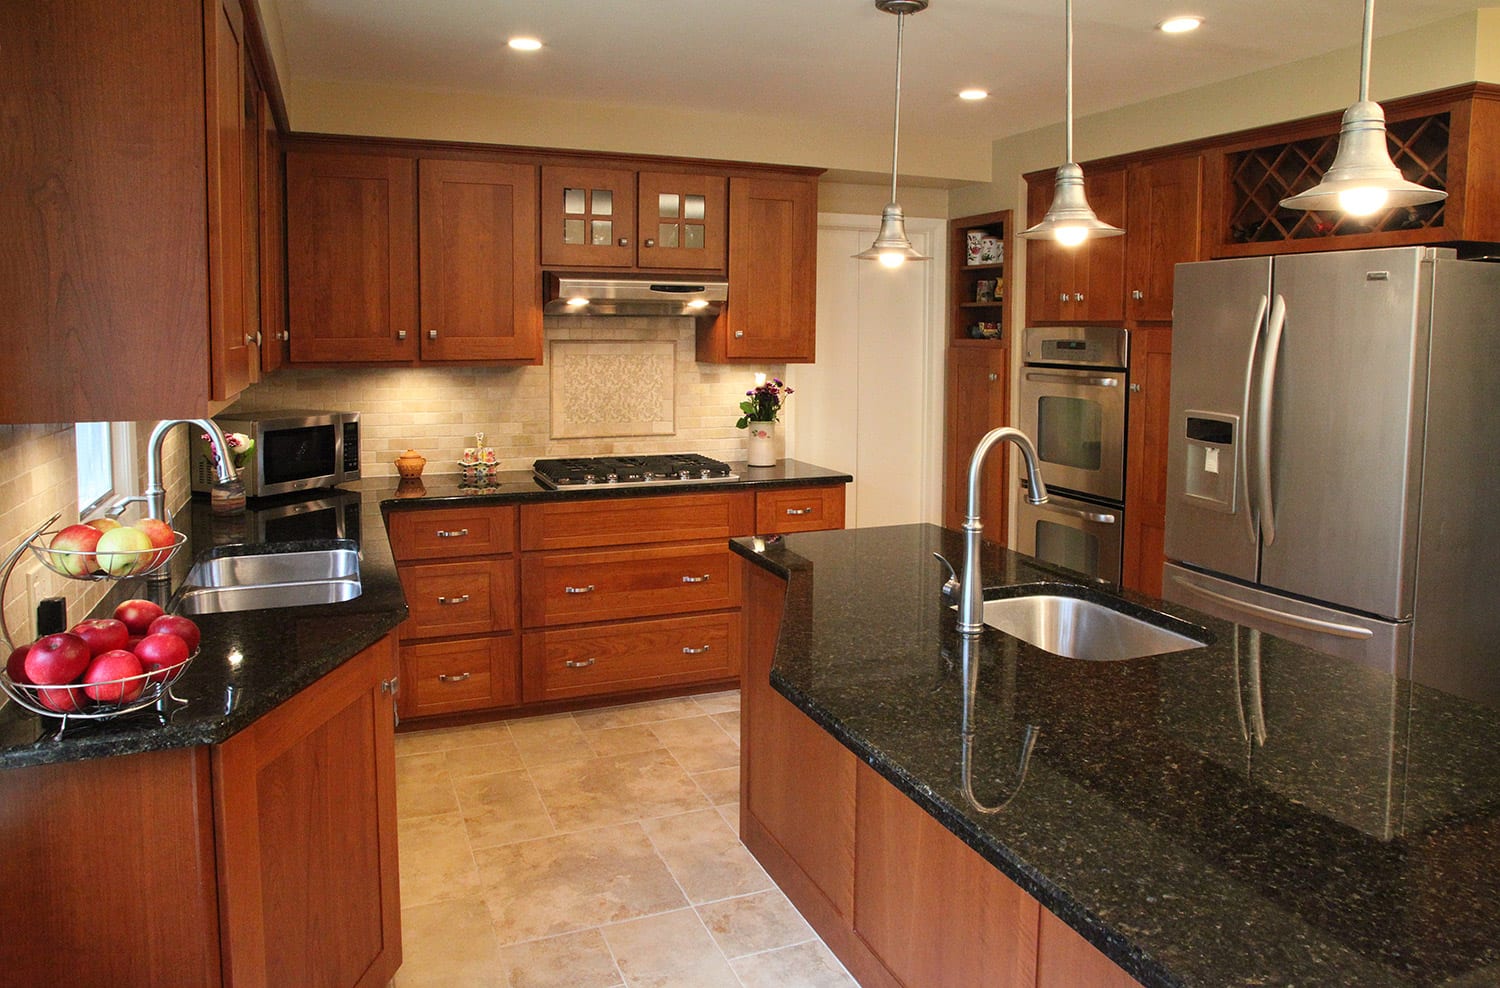 Modern kitchen featuring a large island with second sink